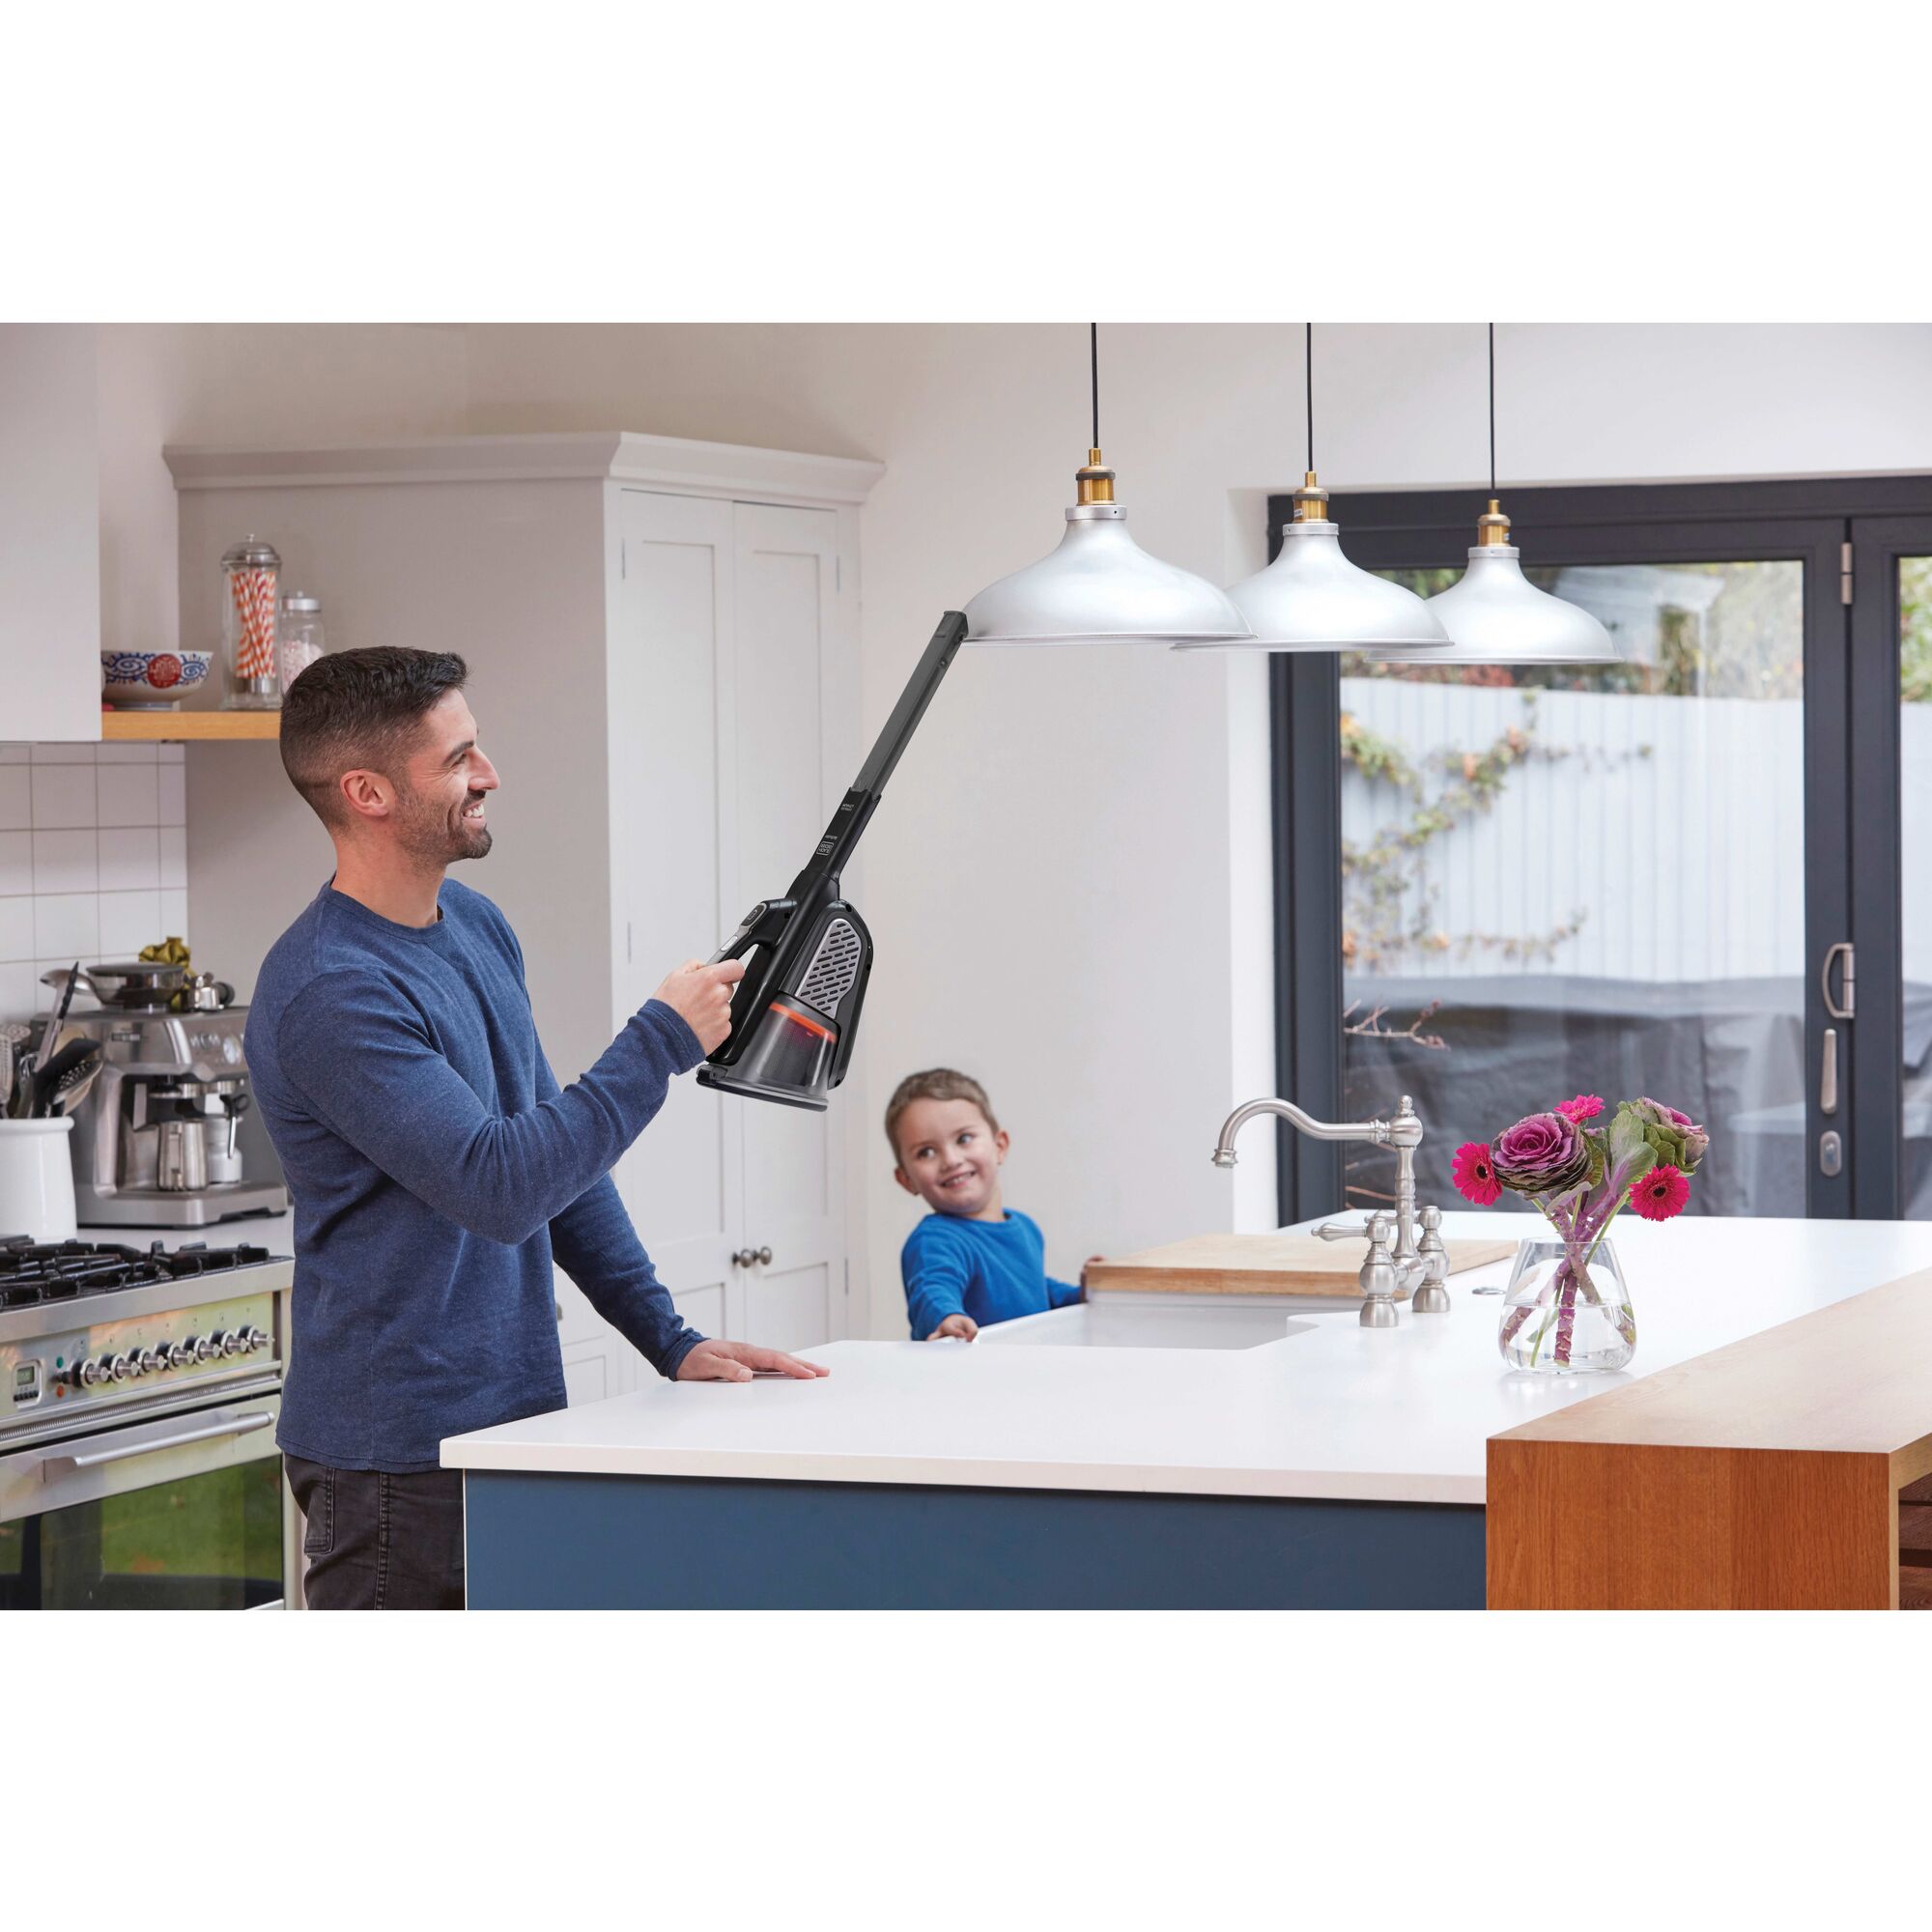 dustbuster Advanced Clean plus Cordless Hand Vacuum being used by person to clean pendant light.